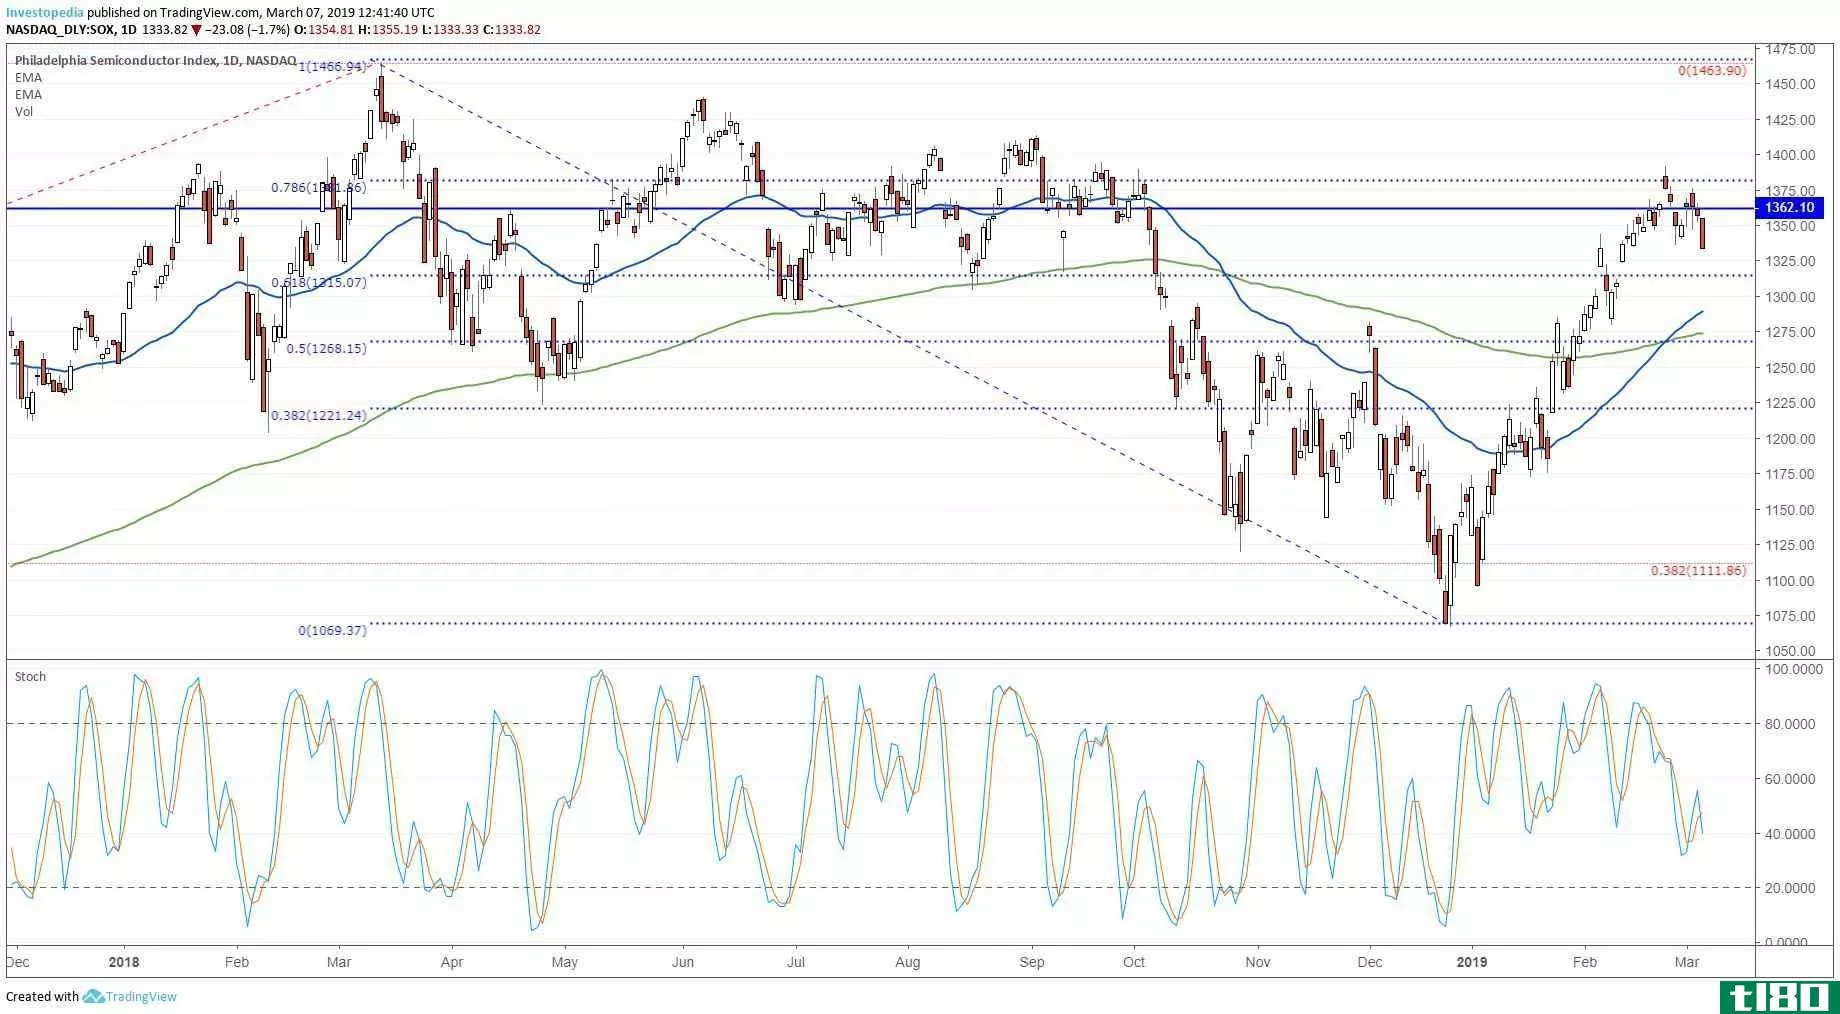 Short-term technical chart showing the performance of the PHLX Semiconductor Index (SOX)